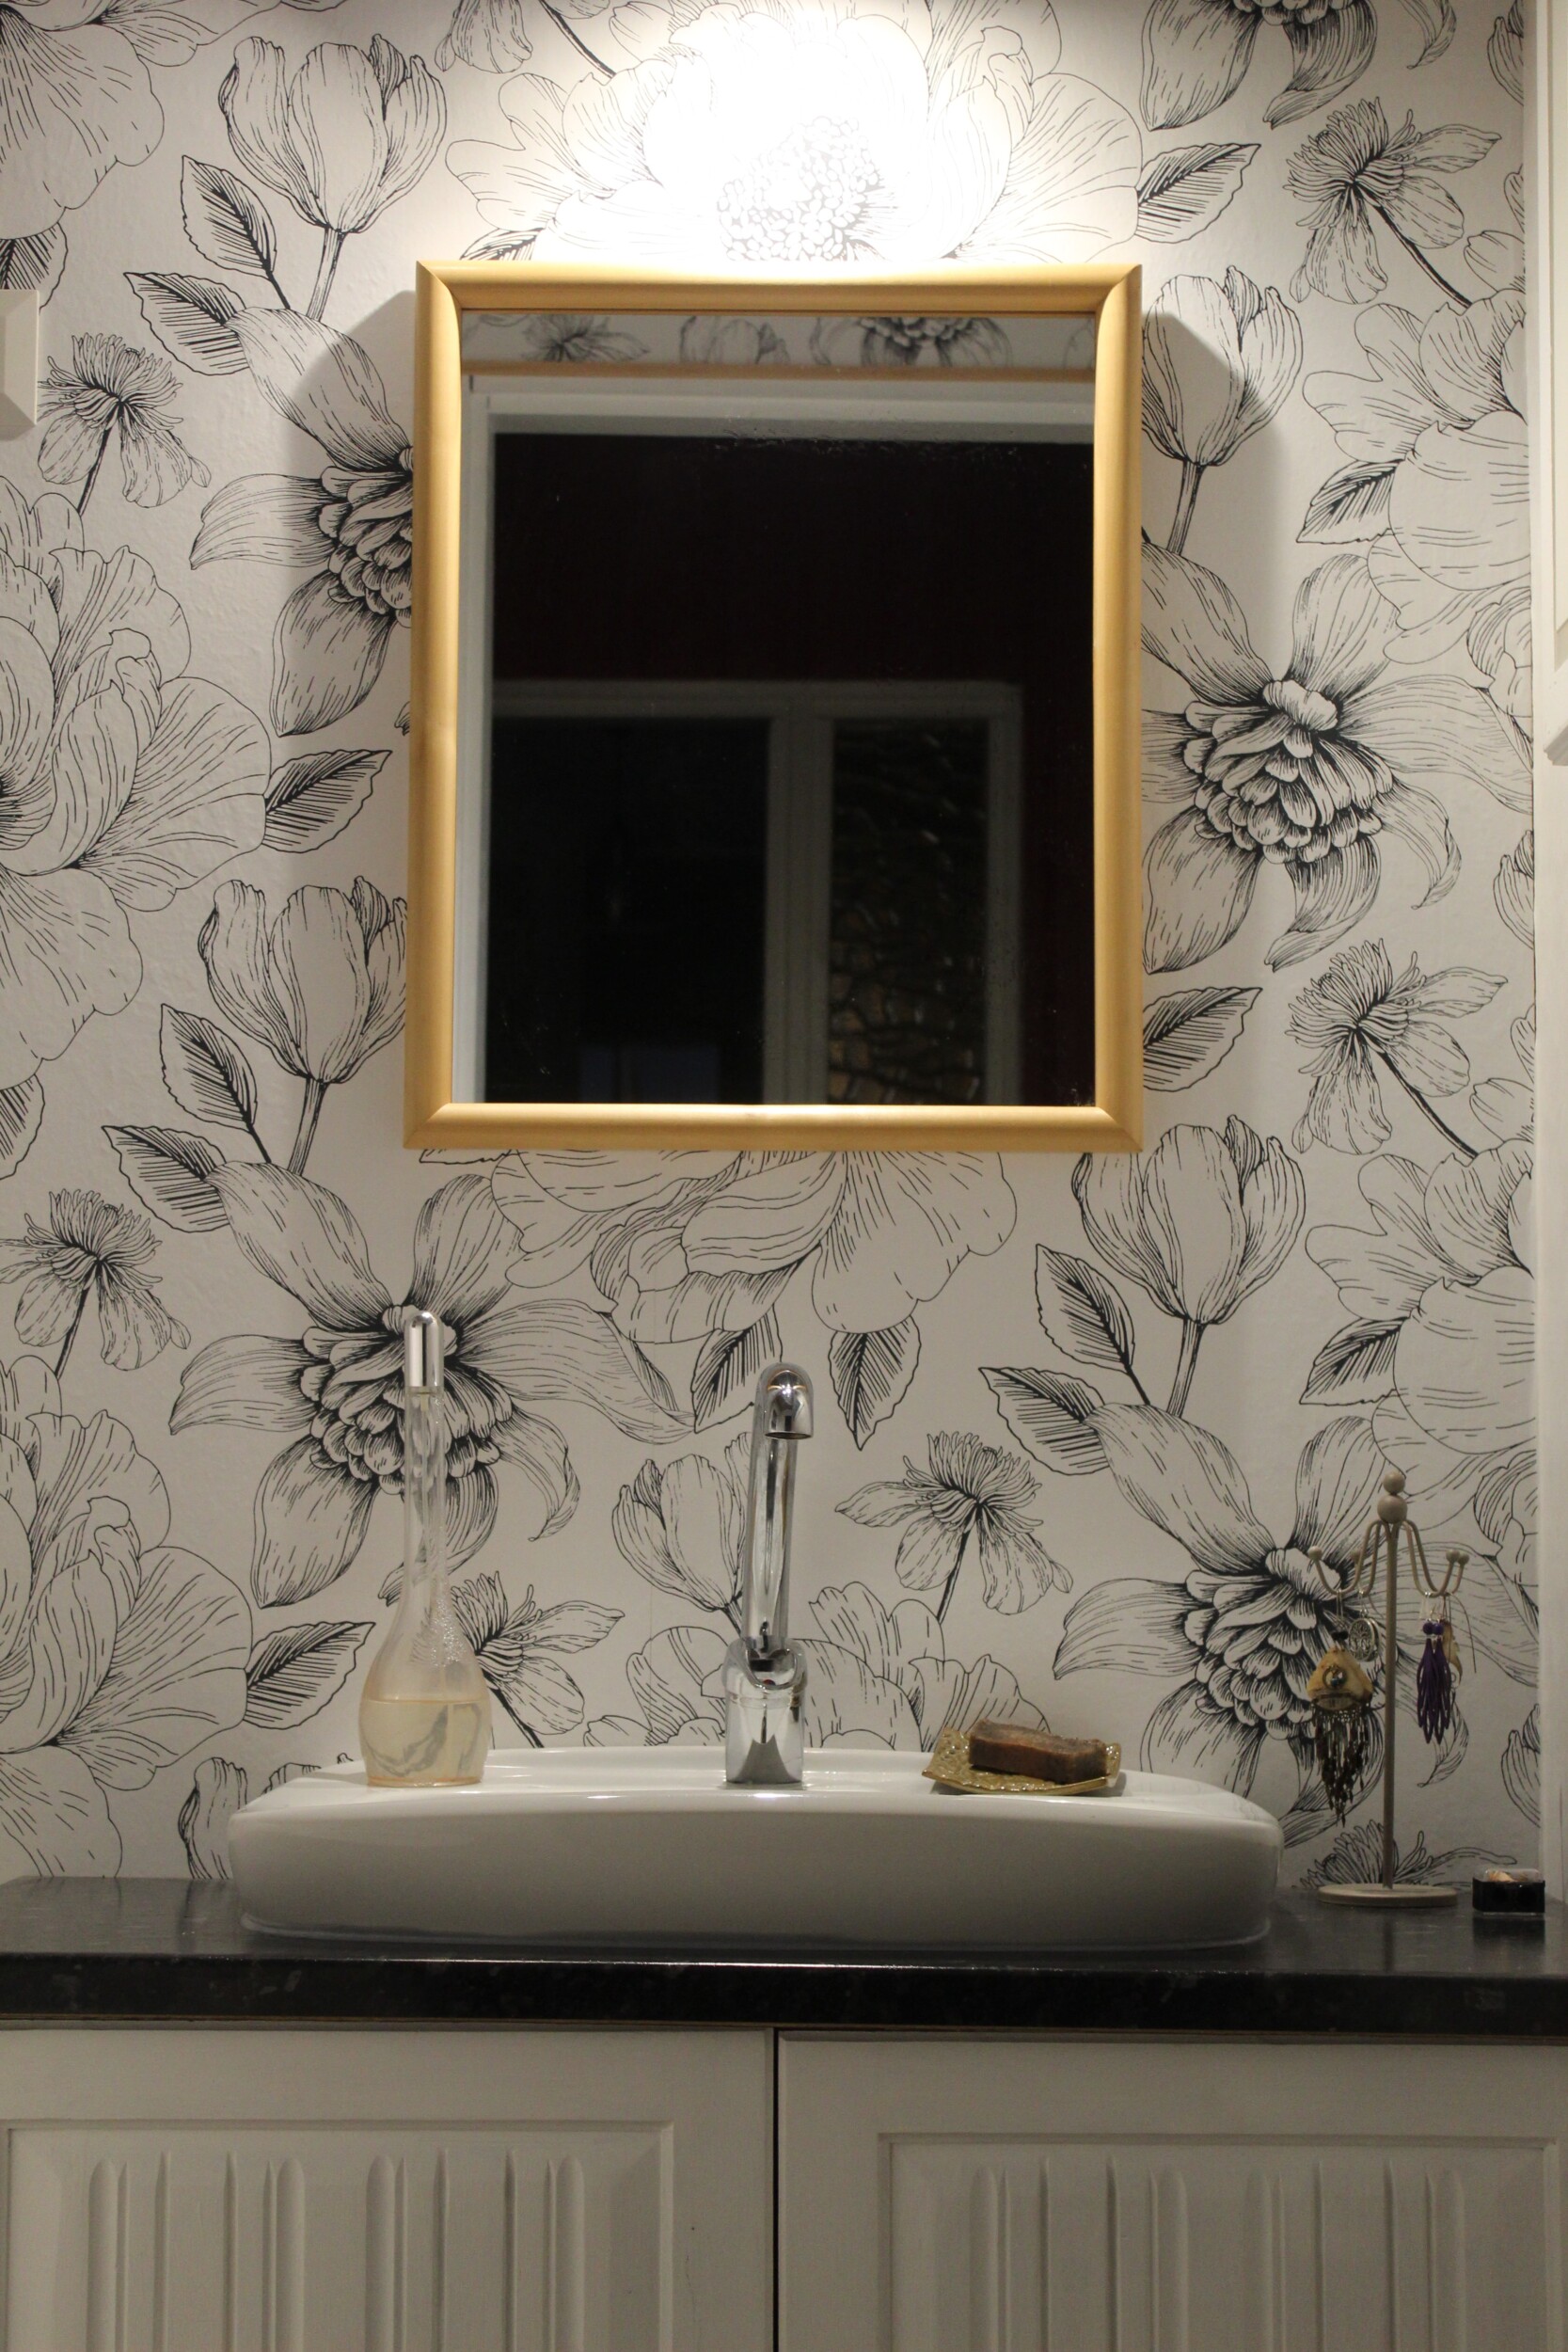 black and white floral bathroom wallpaper